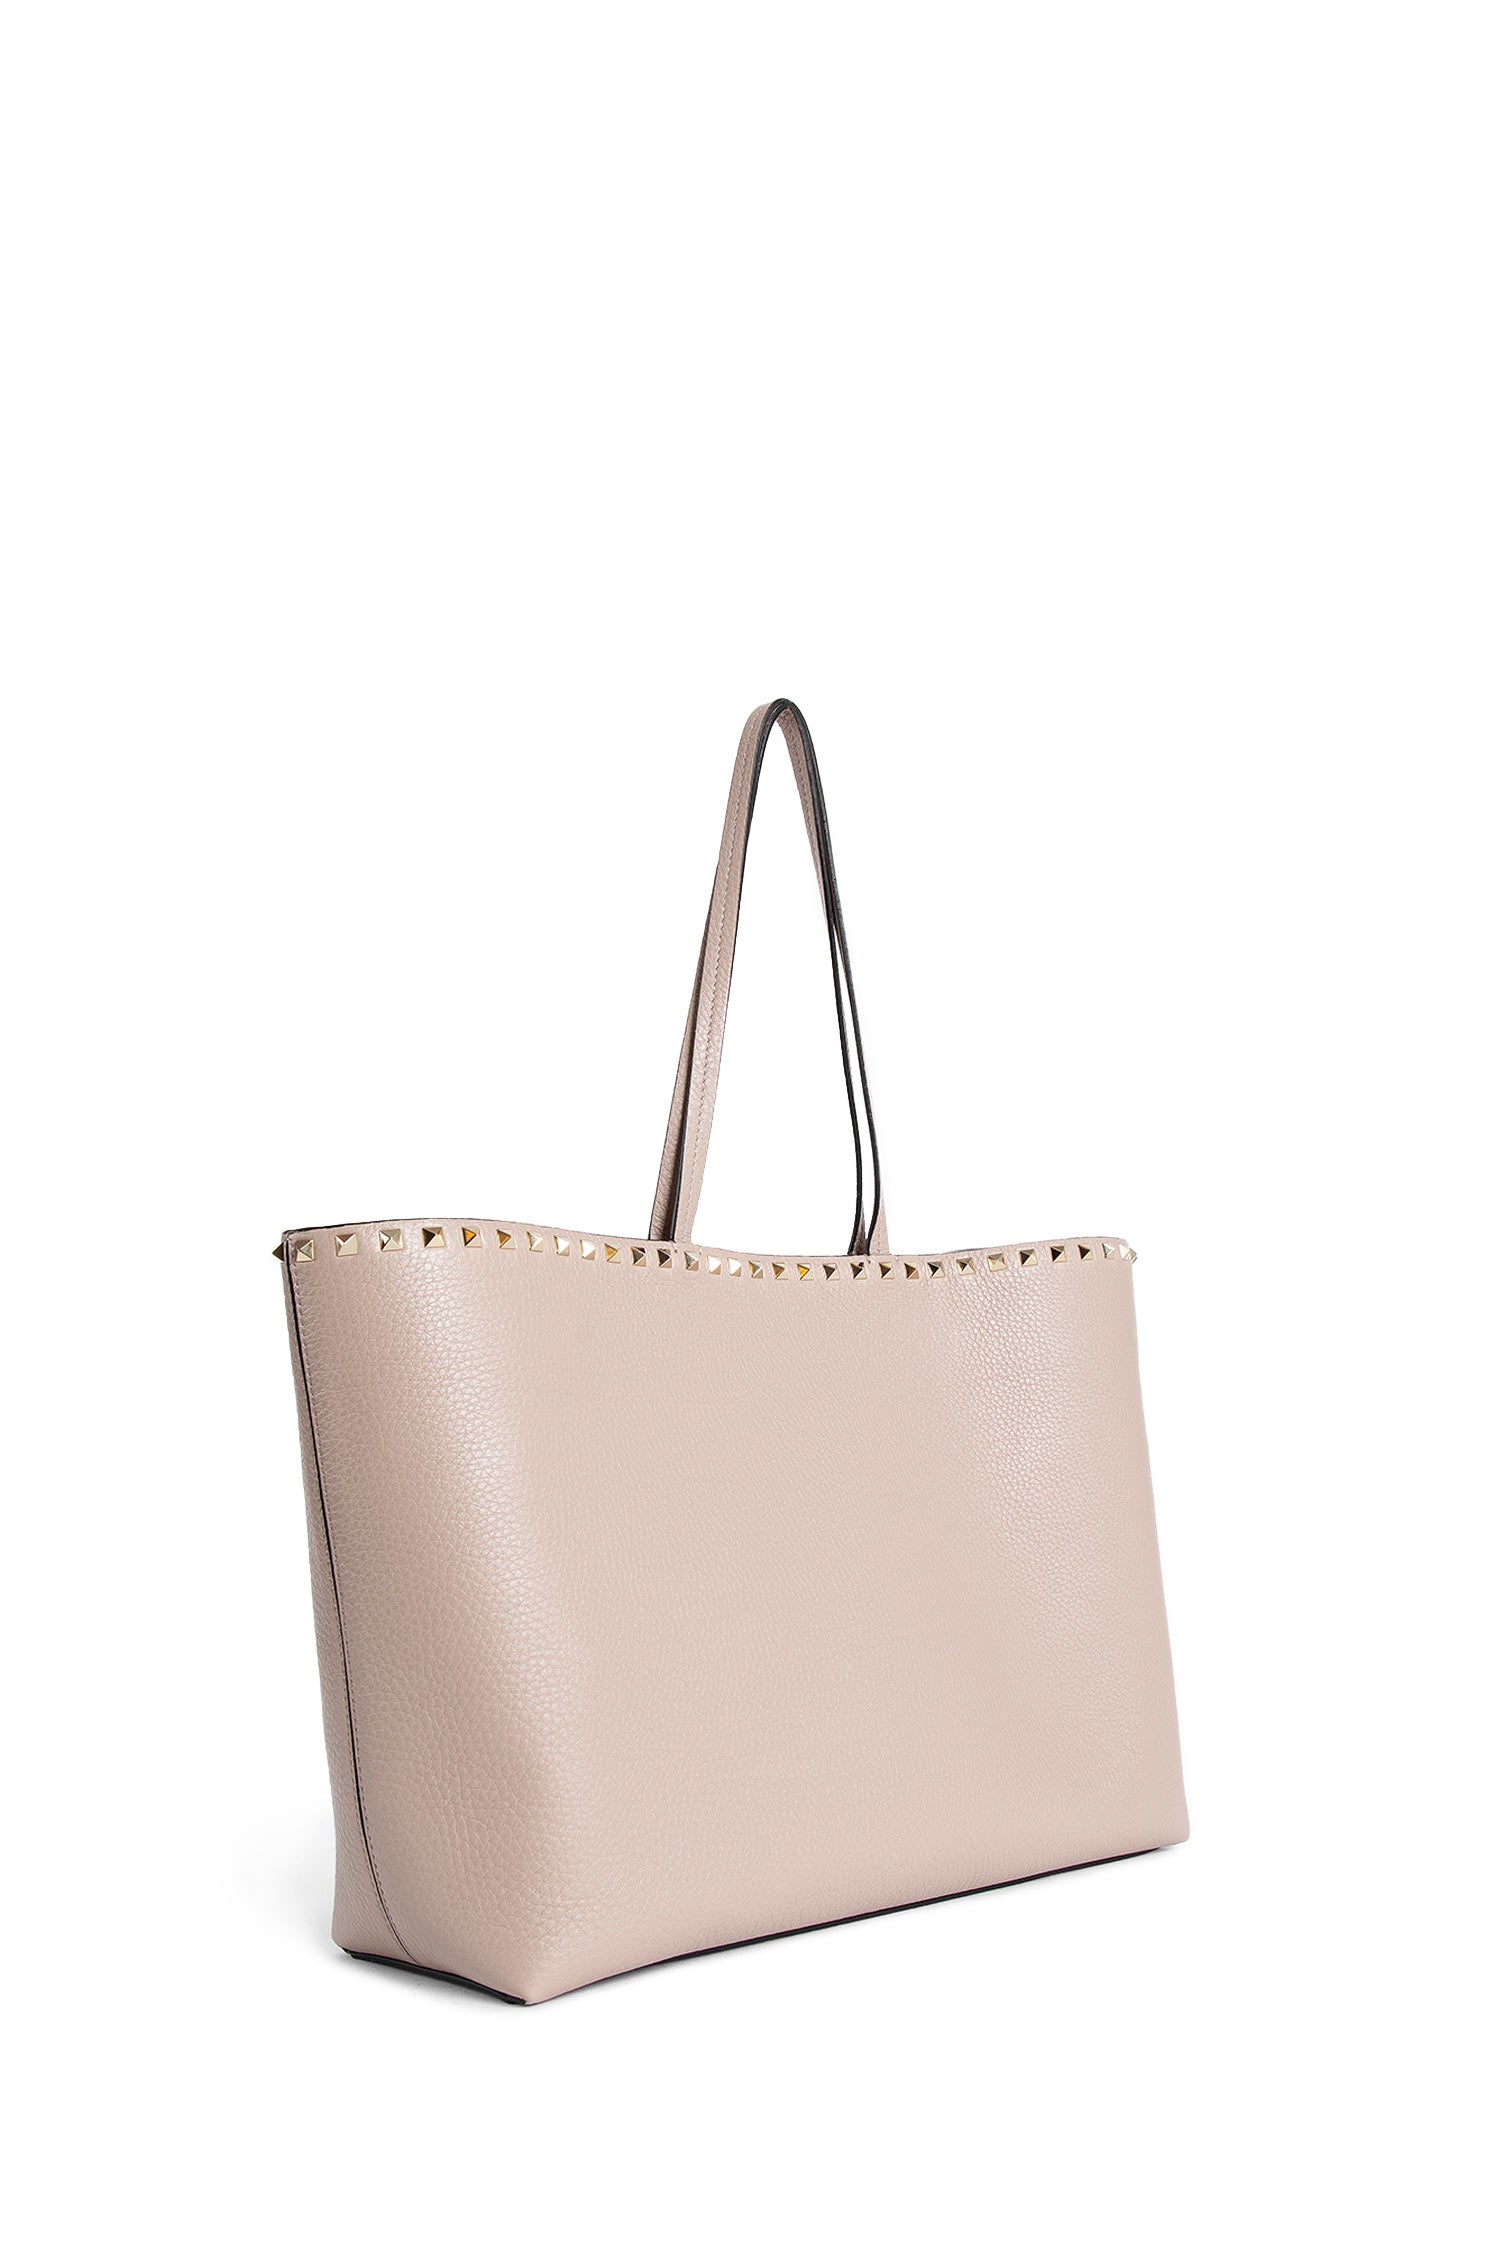 VALENTINO WOMAN PINK TOTE BAGS